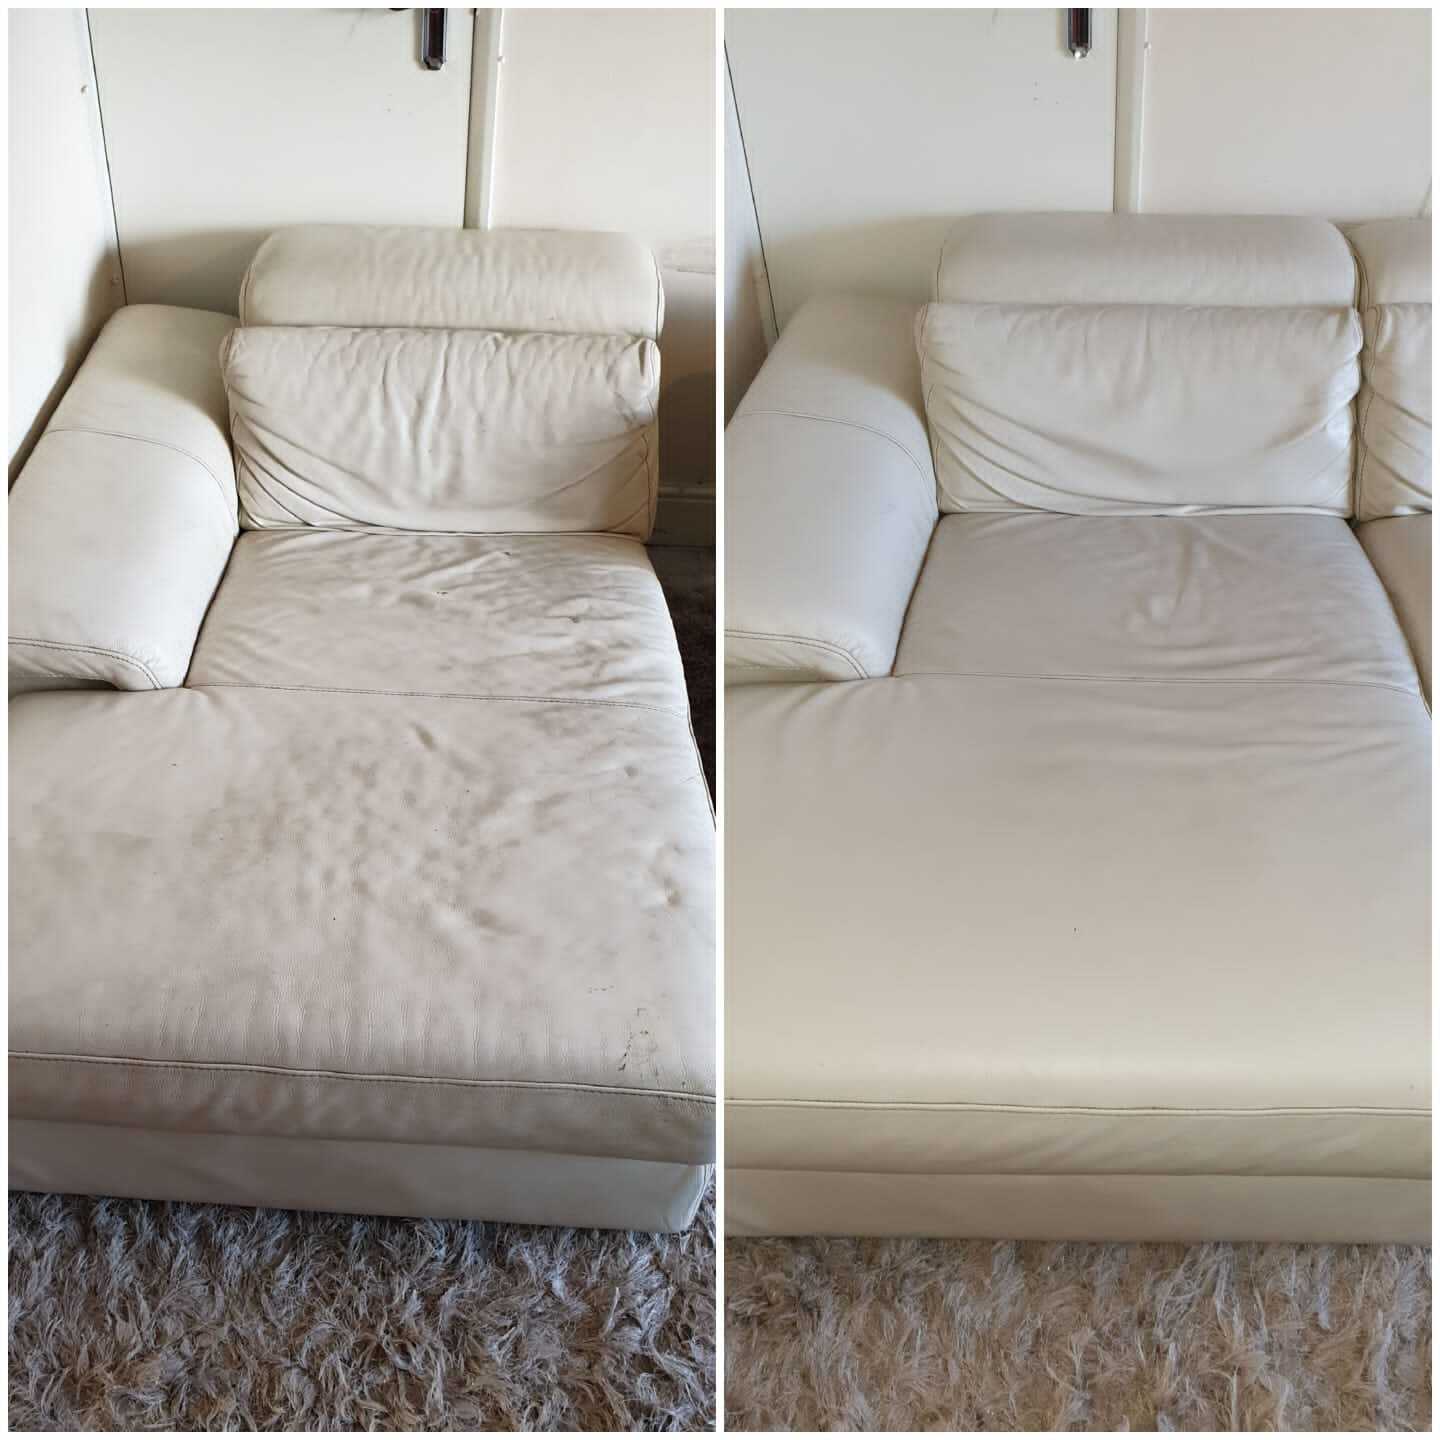 Upholstered sofa before and after cleaning